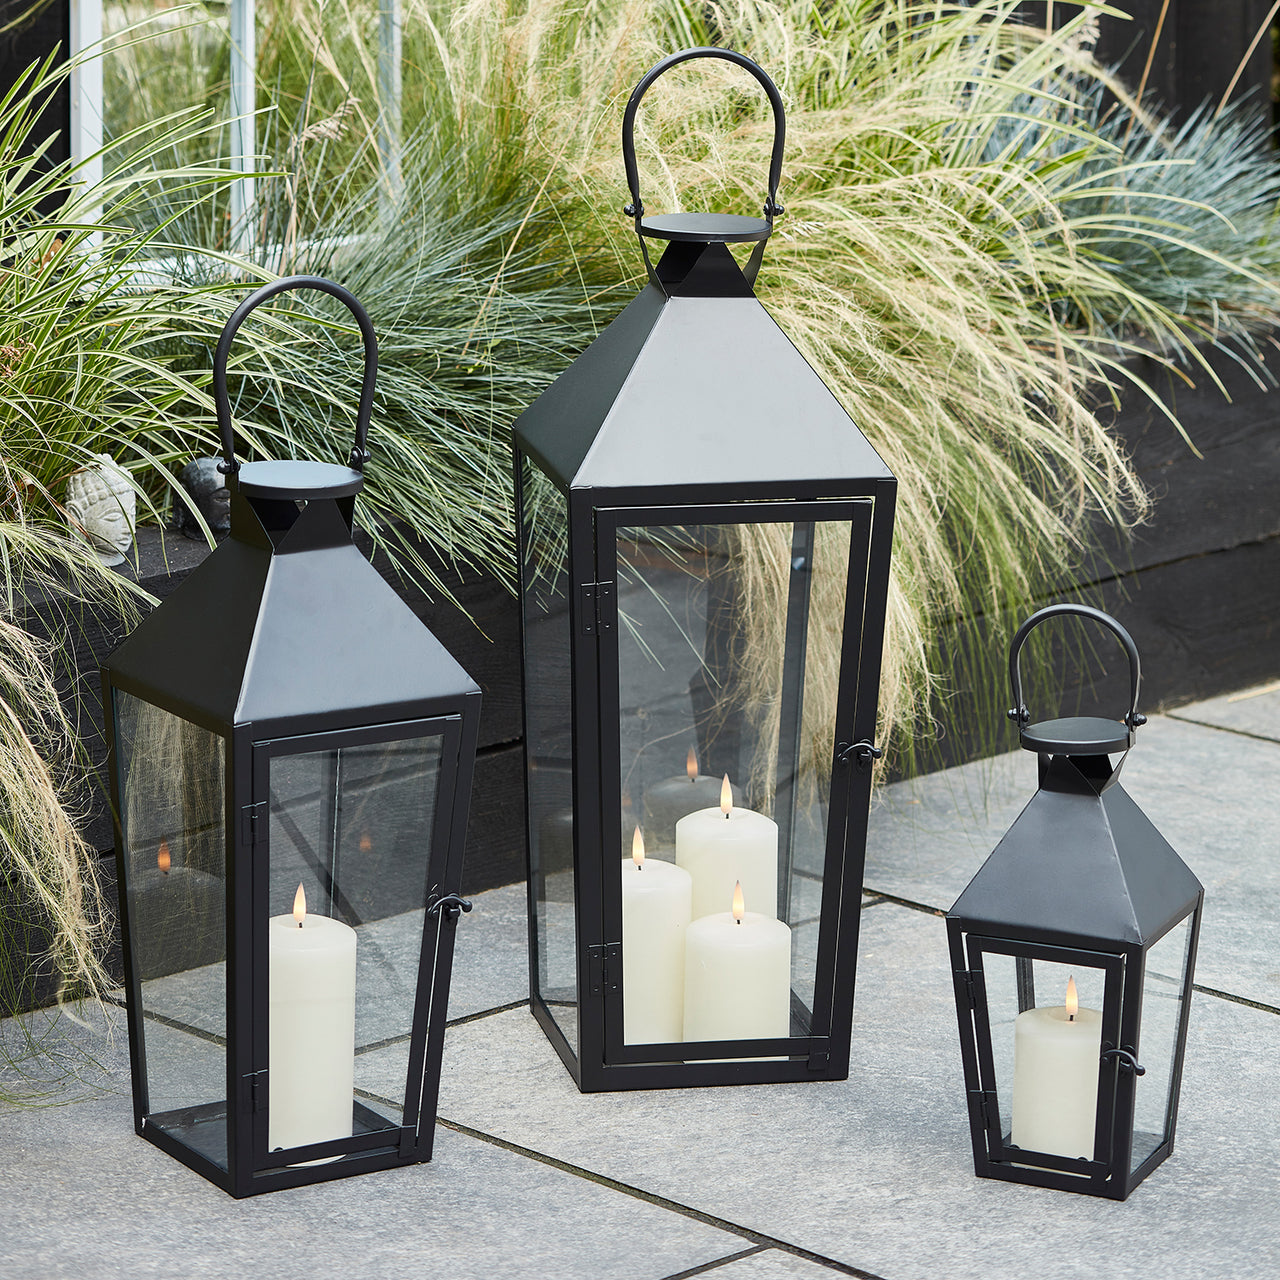 Cairns Black Garden Lantern with TruGlow® Candle